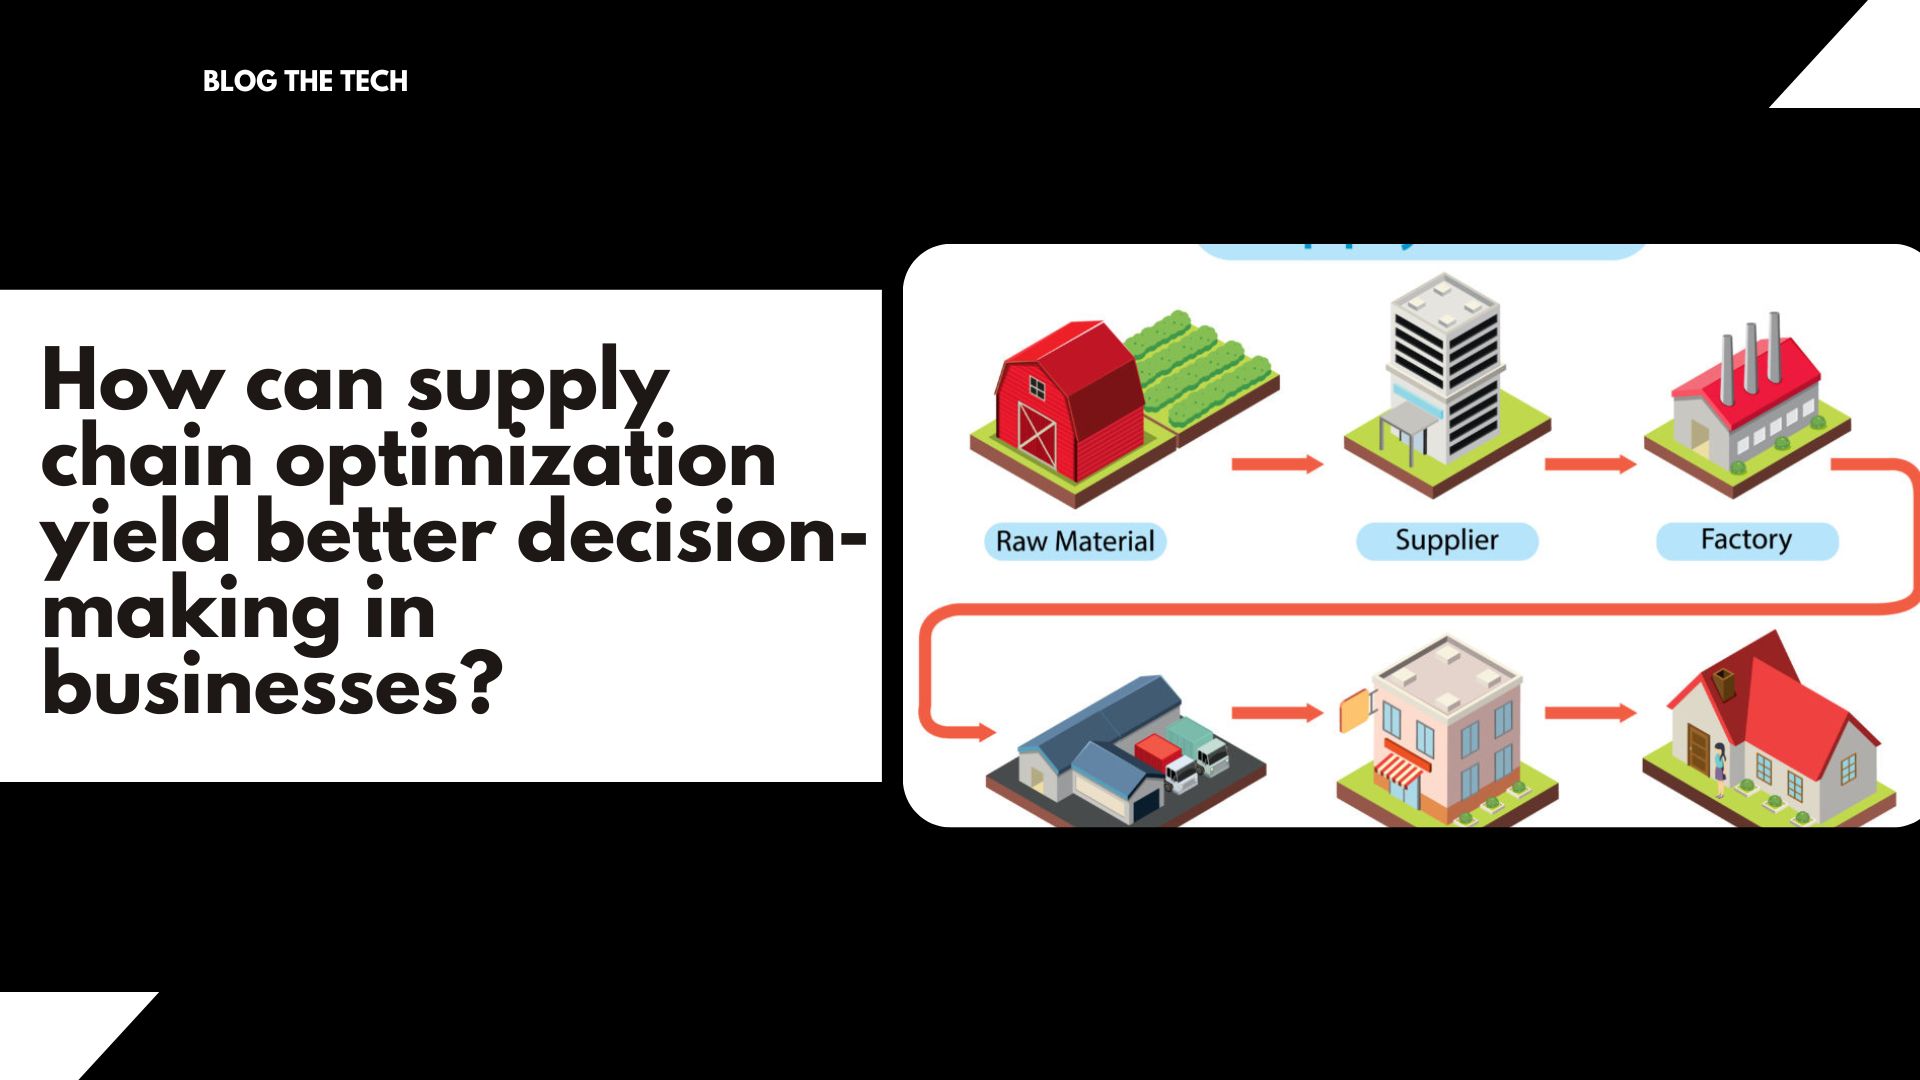 How can supply chain optimization yield better decision-making in businesses?